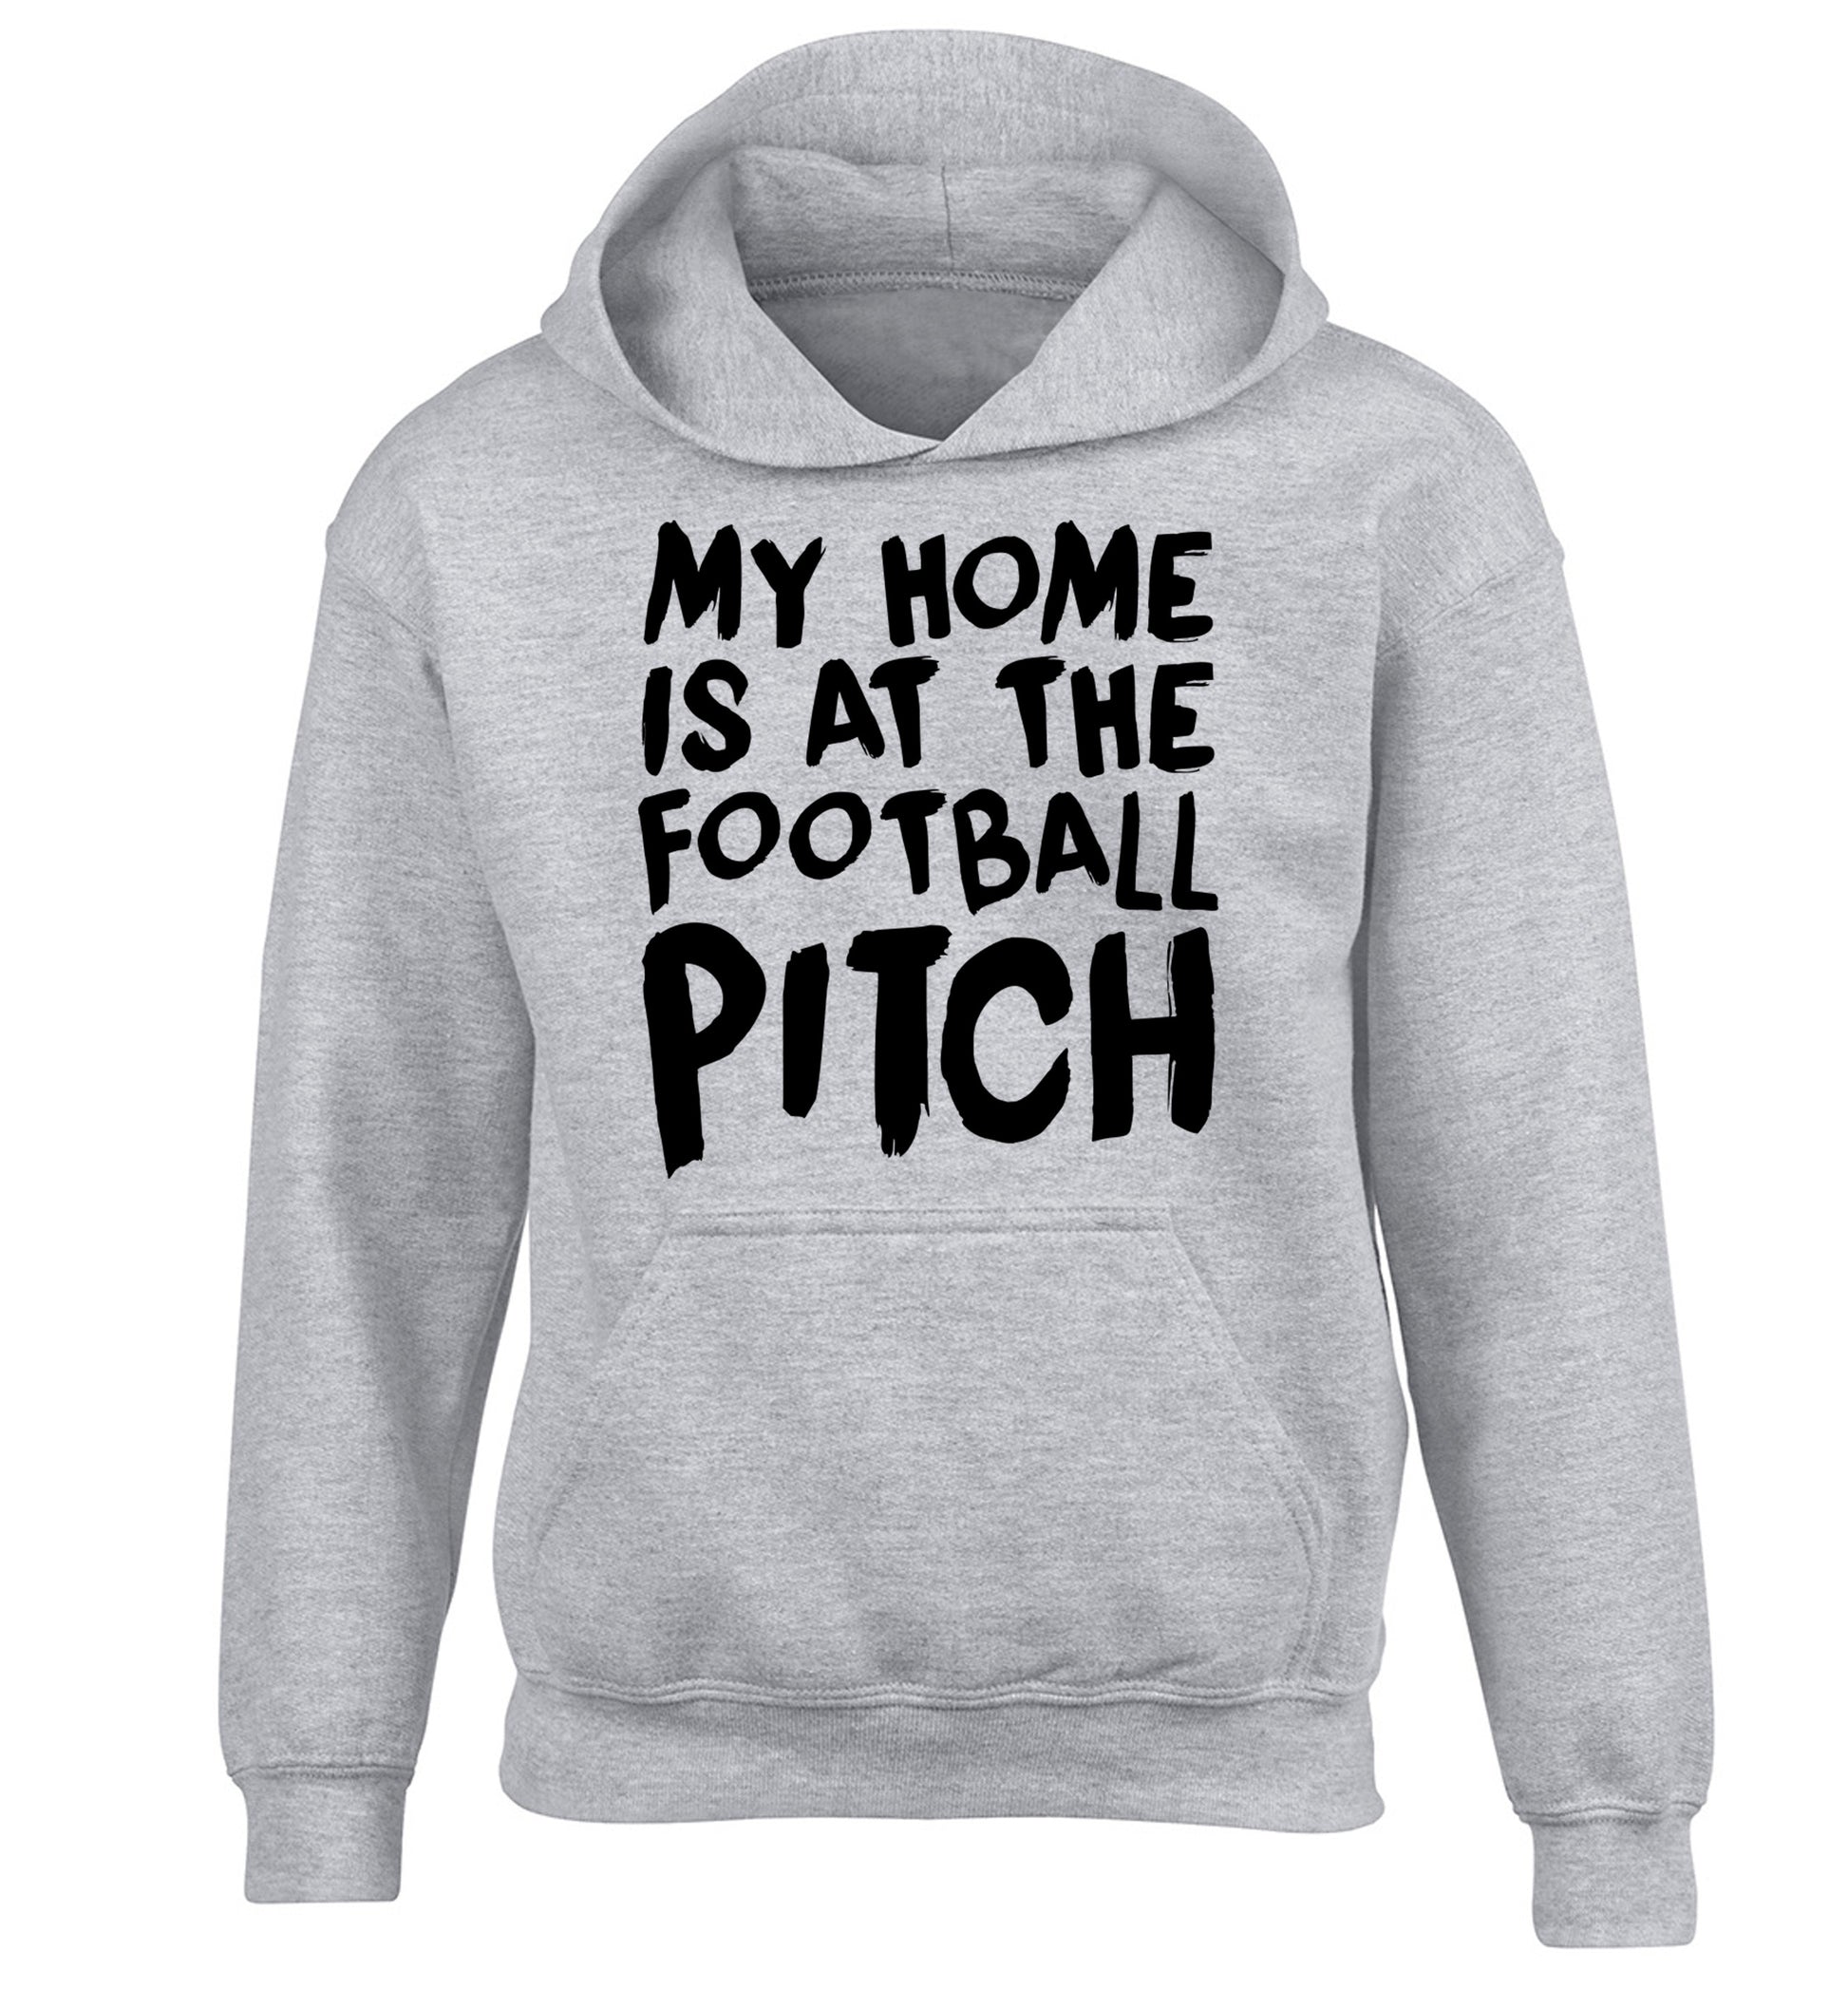 My home is at the football pitch children's grey hoodie 12-14 Years